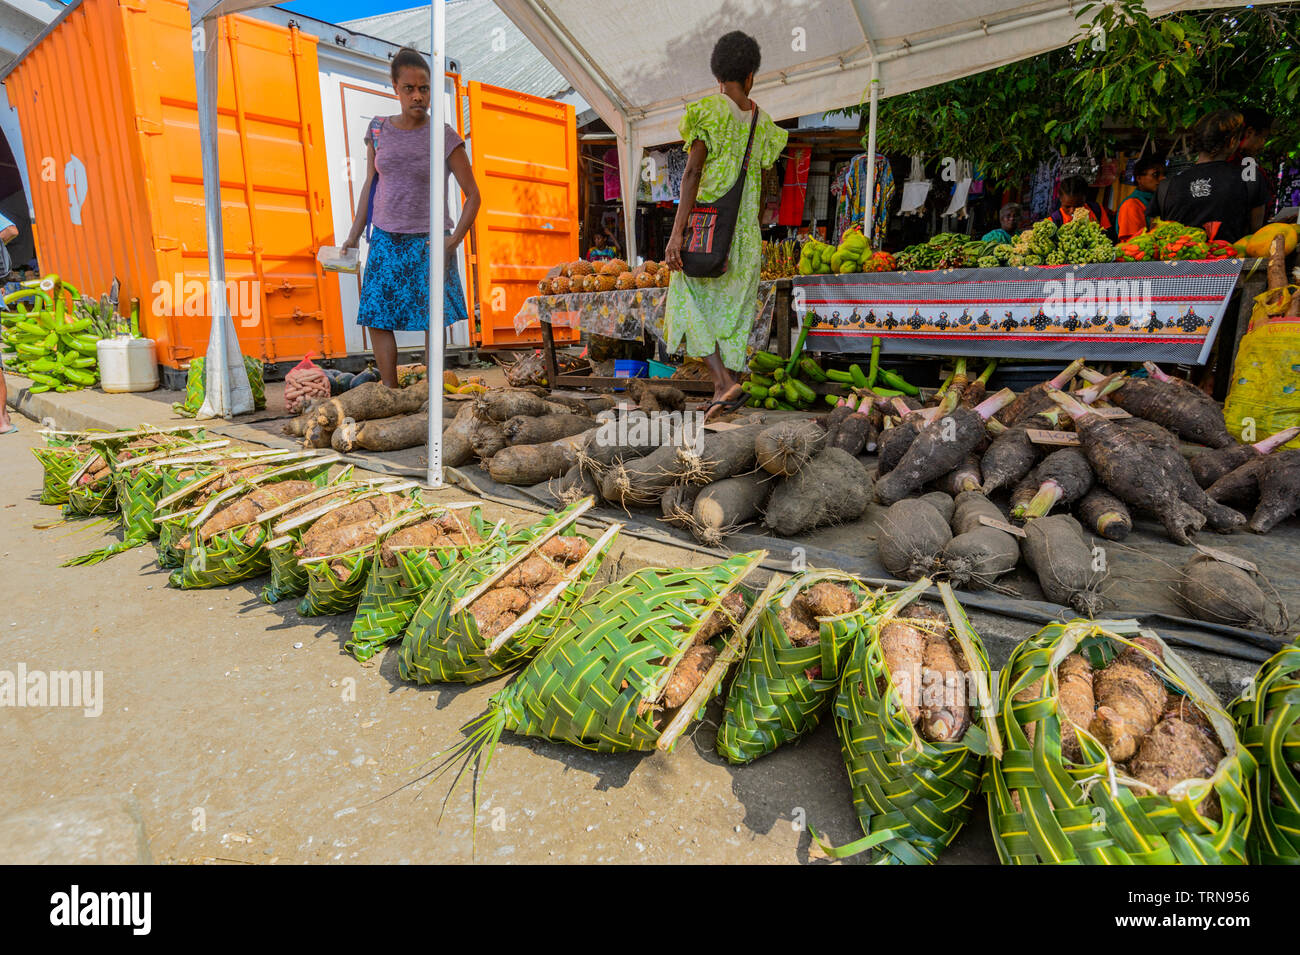 Market stall with woven baskets of root vegetables for sale at the market in Port Vila, Vanuatu, Melanesia Stock Photo